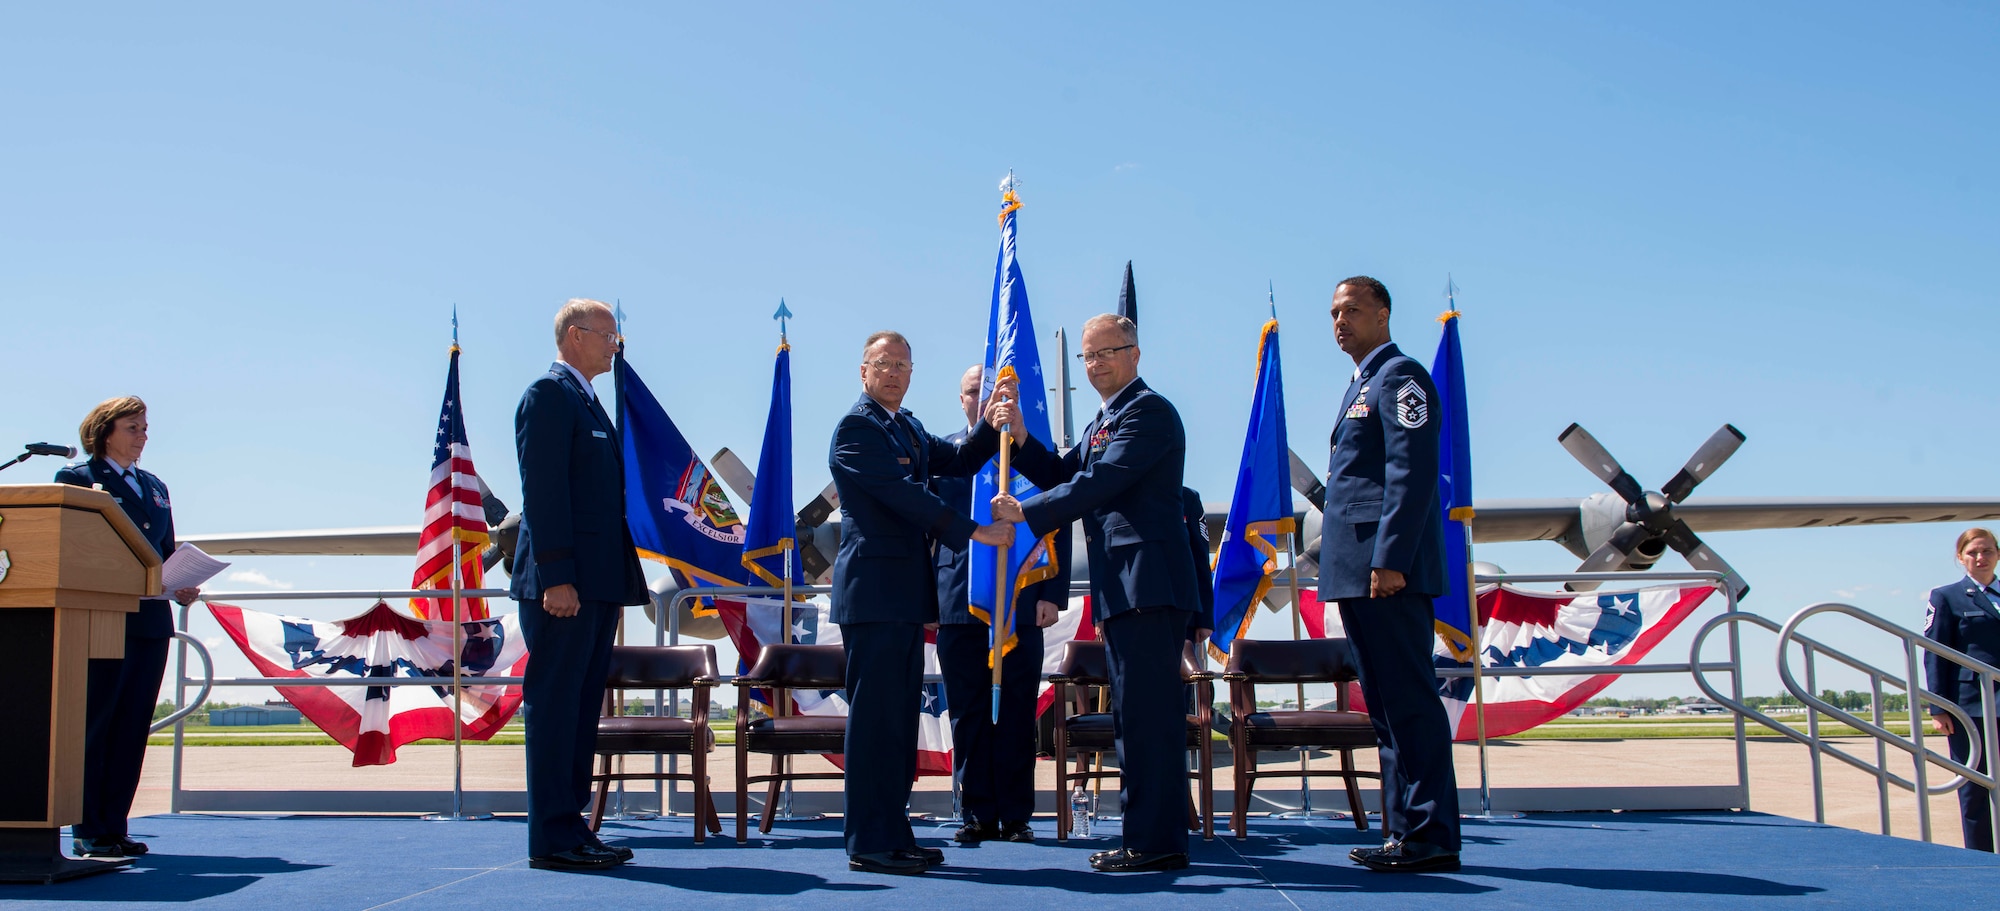 Col. Brian S. Bowman, 914th Air Refueling Wing Commander, accepts the 4th Air Force flag from Maj. Gen. Randall A. Ogden, 4th Air Force Commander, March Air Reserve Base, CA, during the Change of Mission Ceremony, June 3, 2017, Niagara Falls Air Reserve Station, N.Y. The Airlift Wing has been re-designated as an Air Refueling Wing, and as such, will fall under 4th Air Force moving forward. Under the new mission, the 914th will be flying the KC-135 Stratotanker. (U.S. Air Force photo by Tech. Sgt. Stephanie Sawyer)